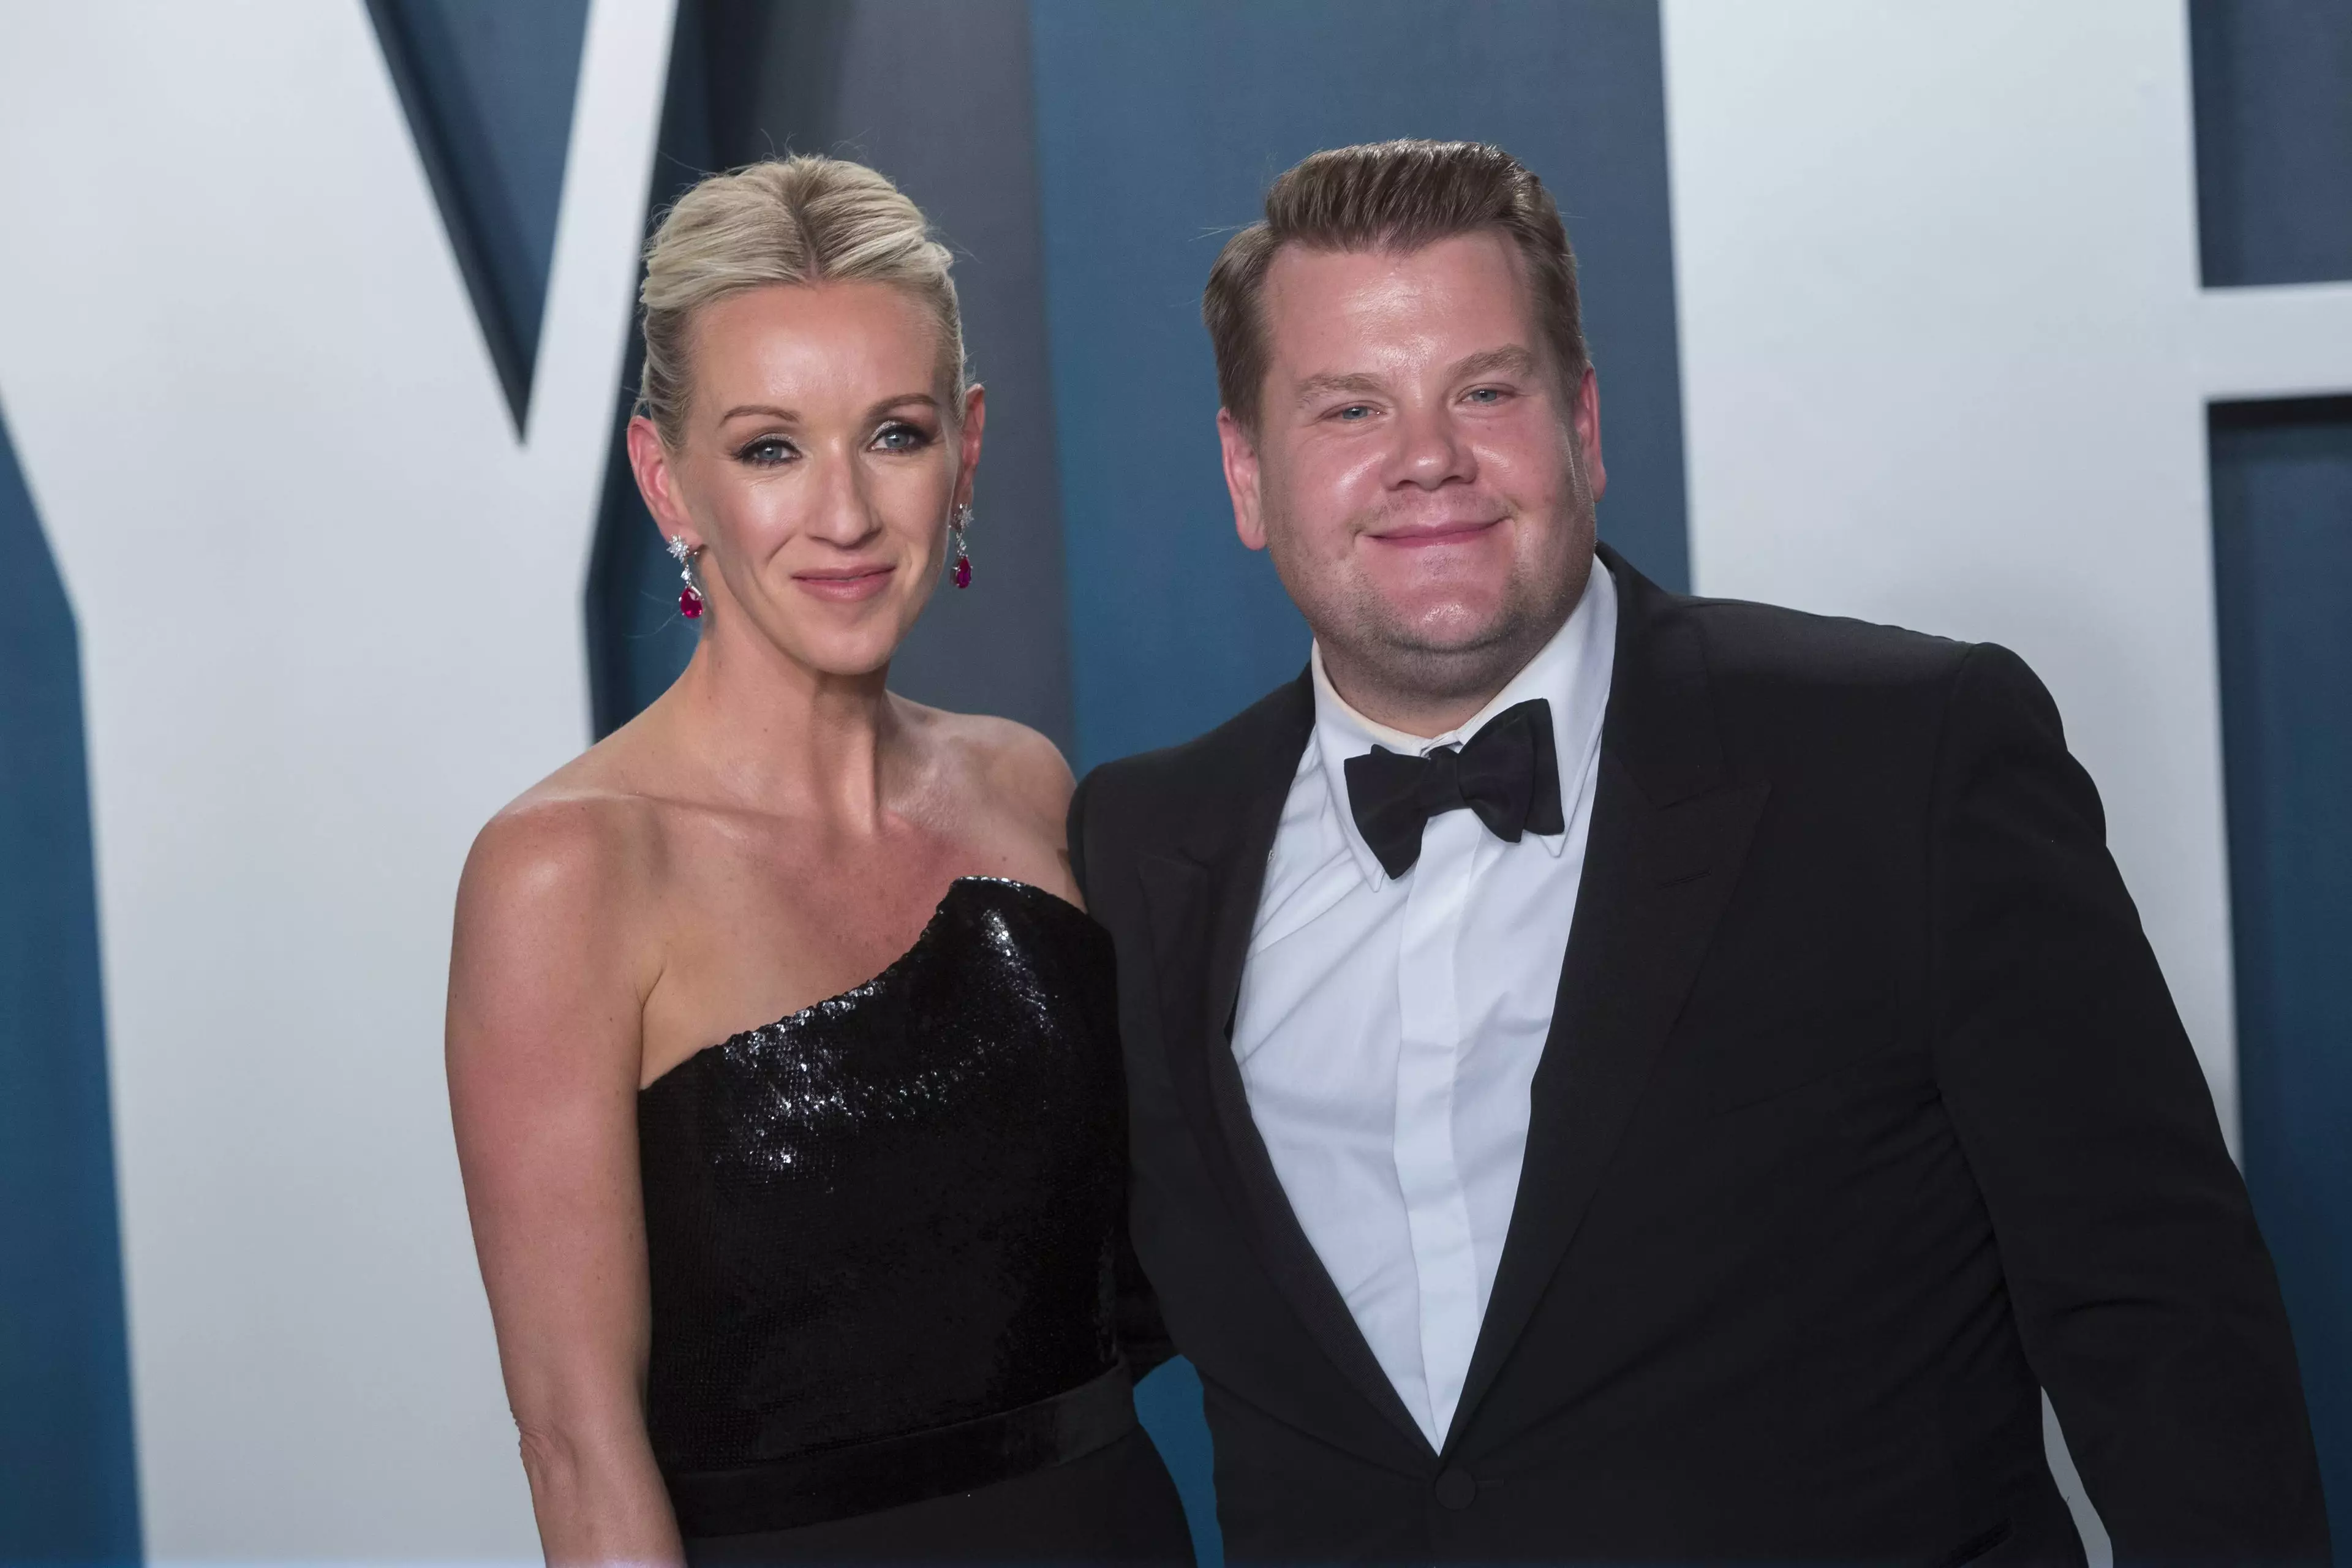 Corden has apparently been left fearful for the safety of his family.